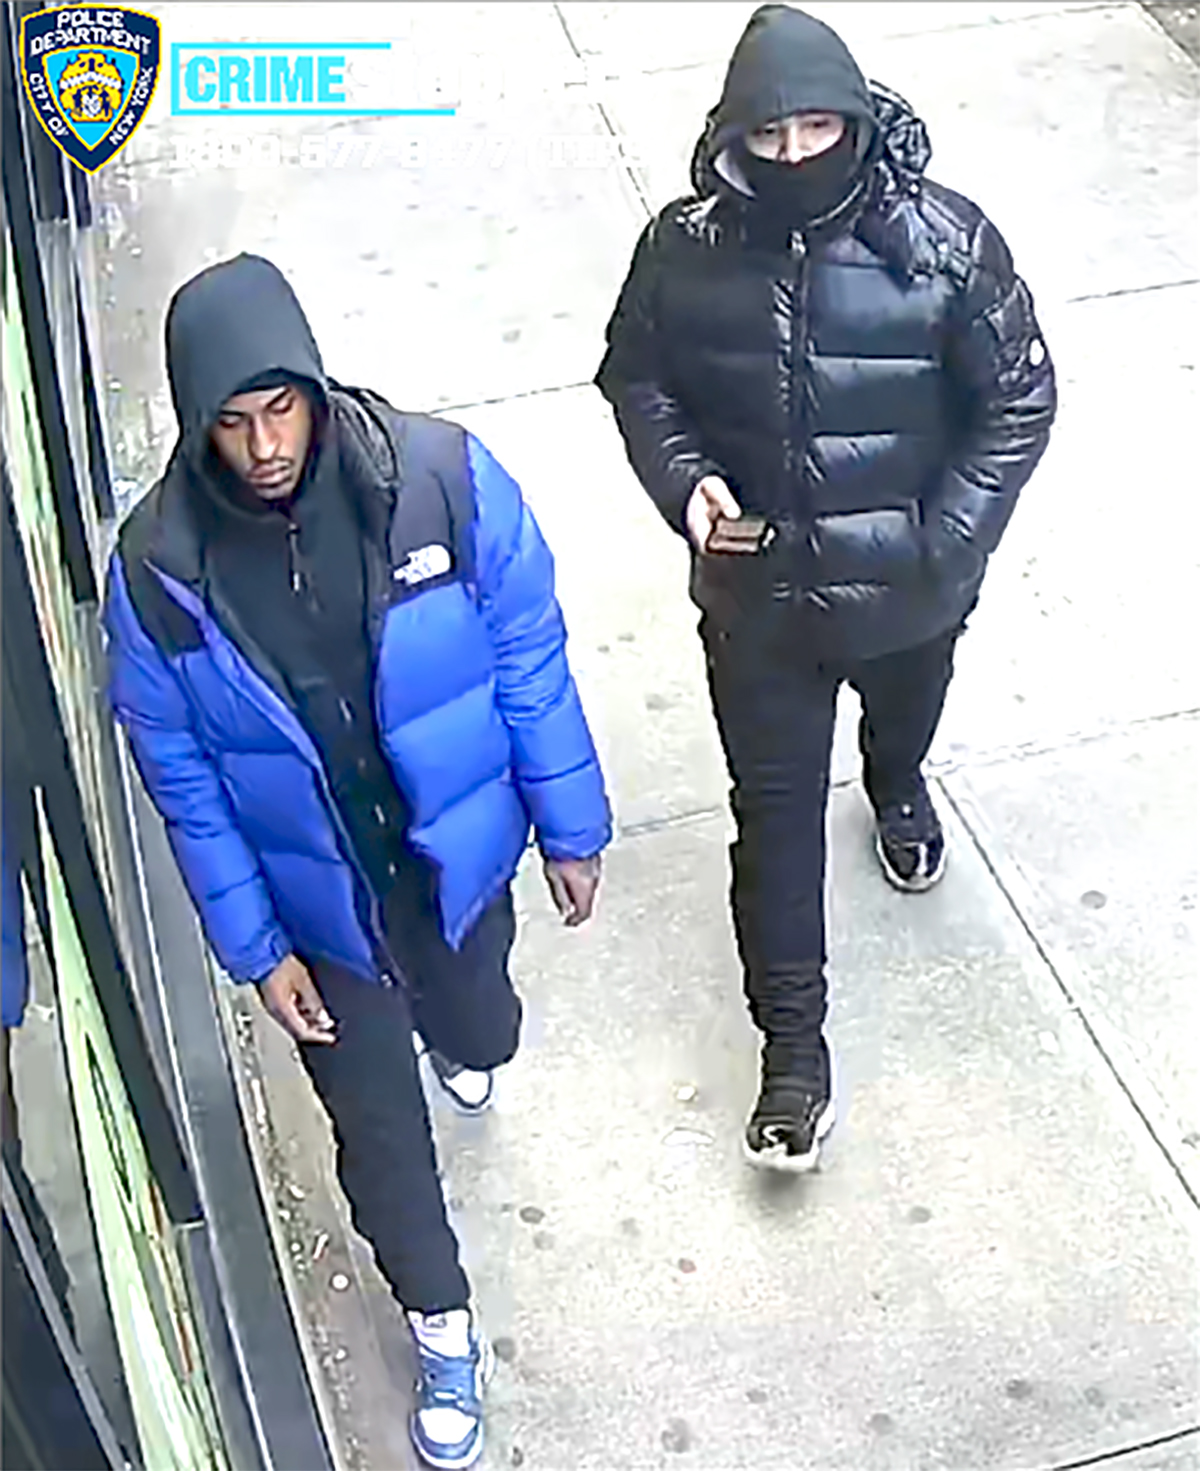 The NYPD is searching for these two men in connection with a double shooting on New Year's Day.